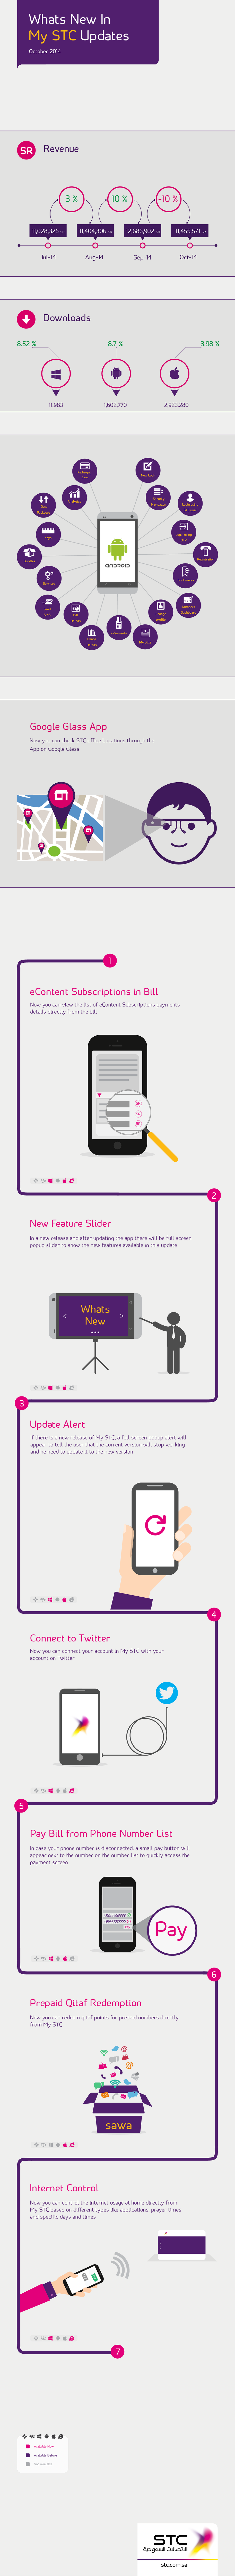 Infographic Whats New In My STC Updates June 2014 infographic